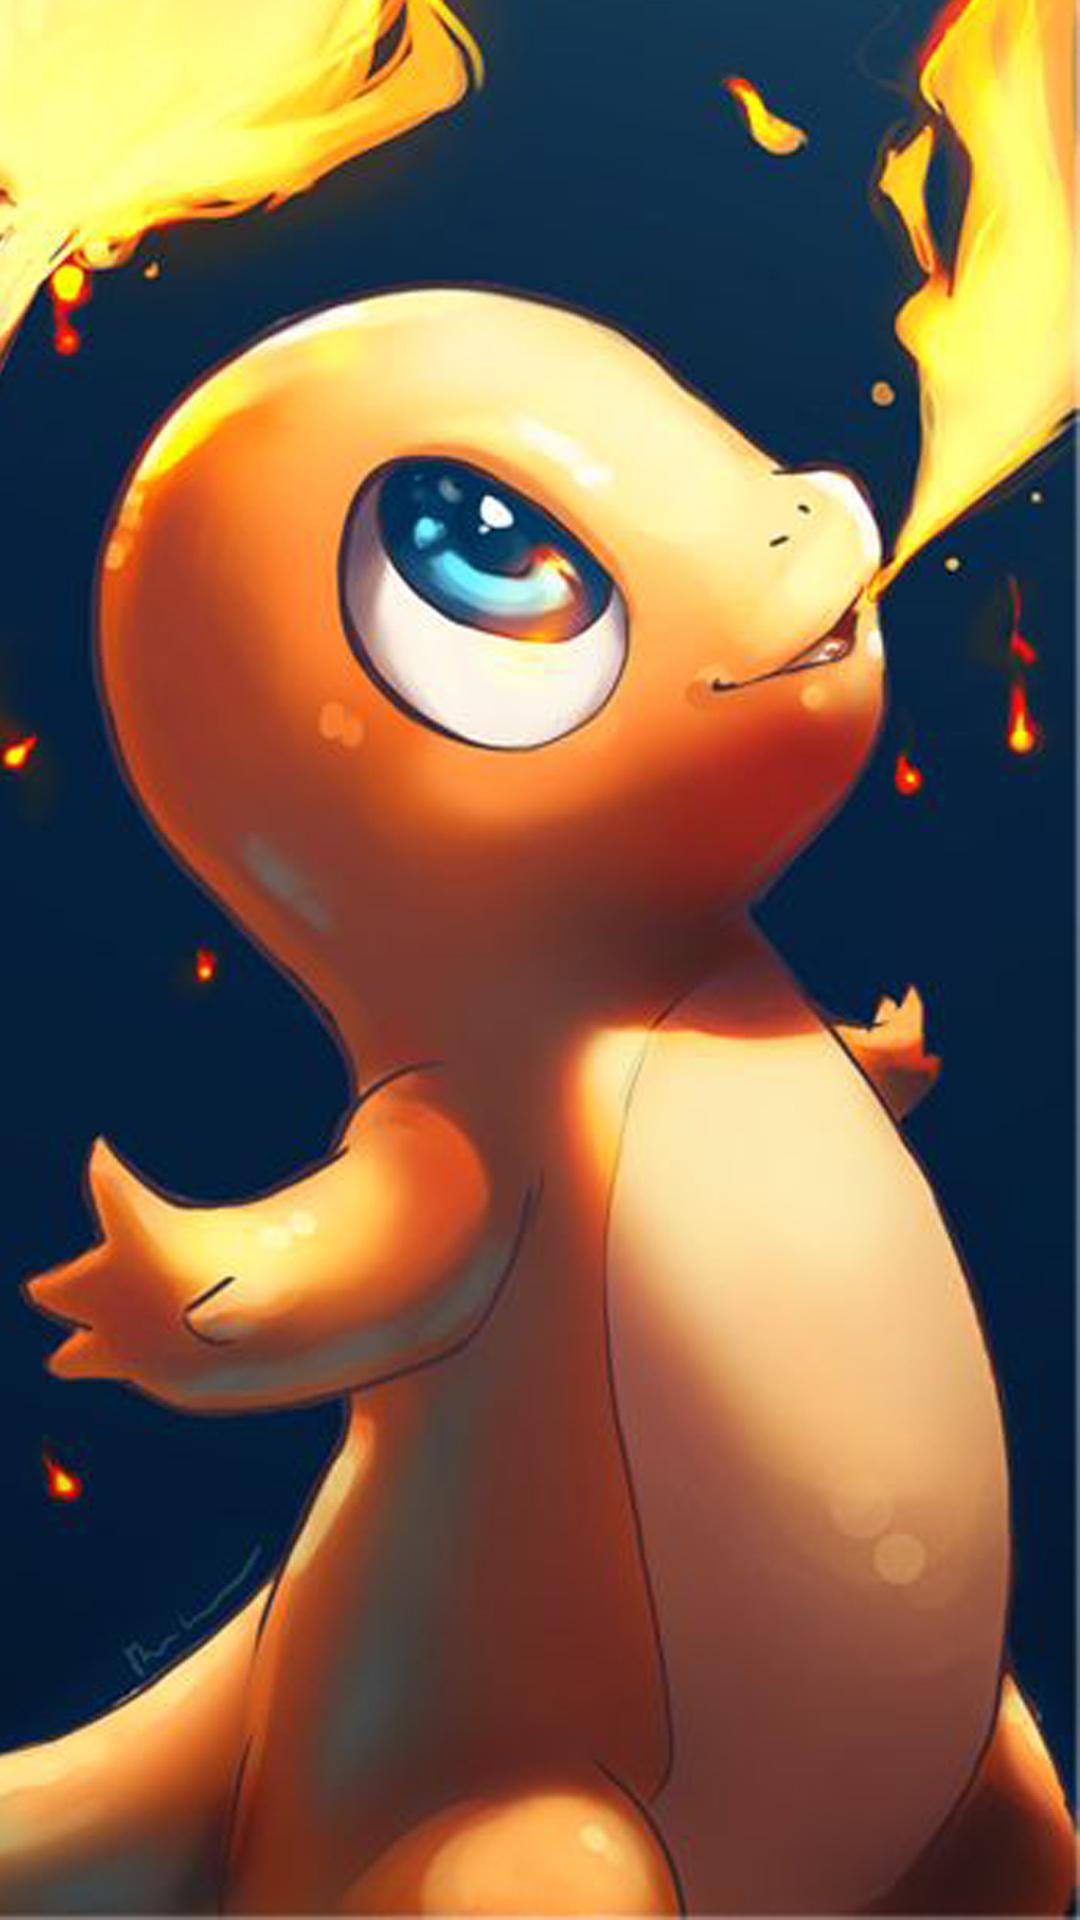 Funny Cute Pokémon Phone Wallpapers - Wallpaper Cave